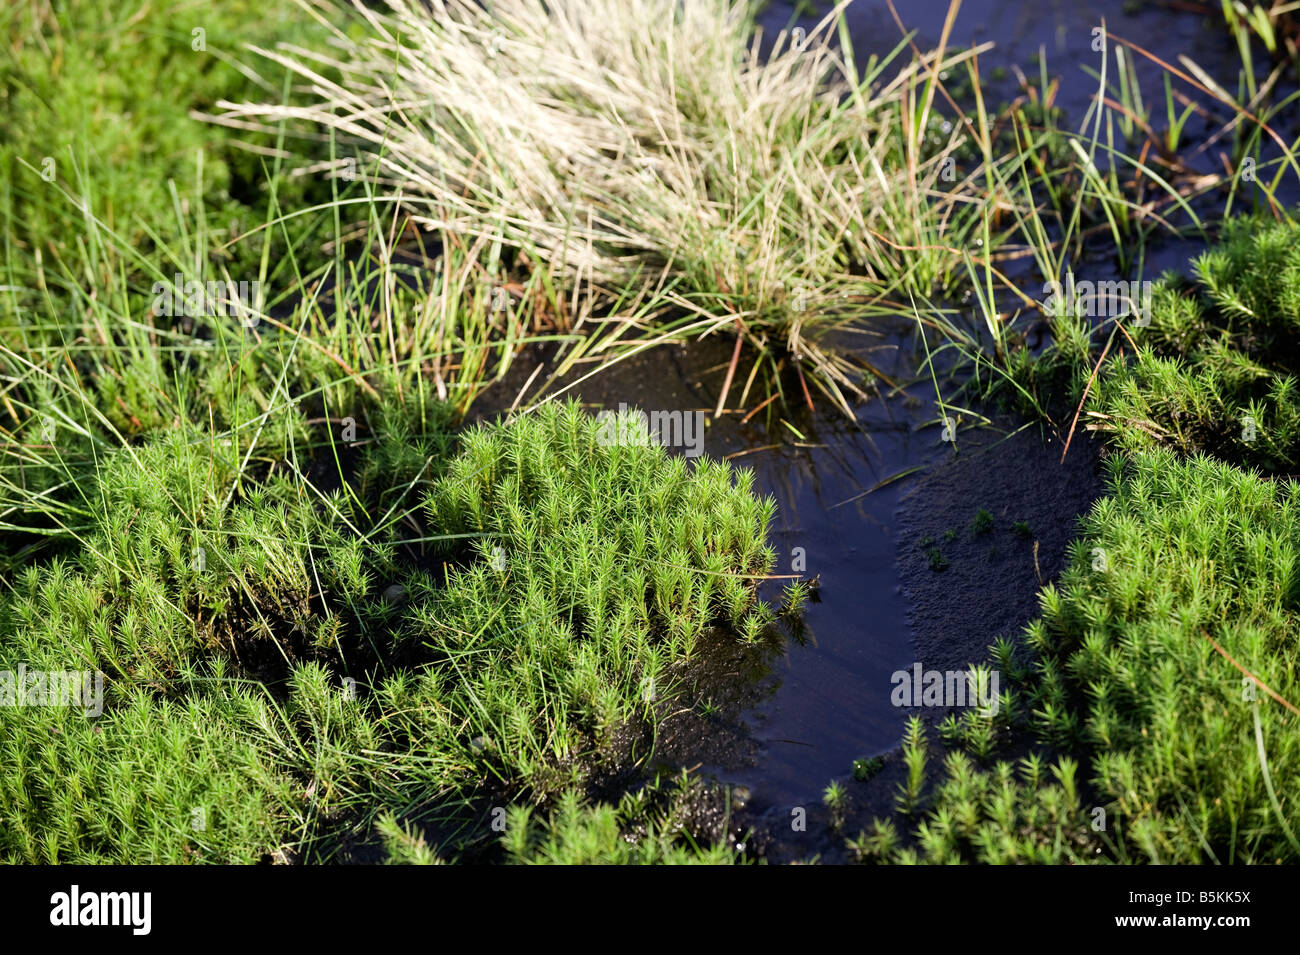 Peat Moss Sphagnum sp found in blanket bog and wet peat ground on moorland Stock Photo